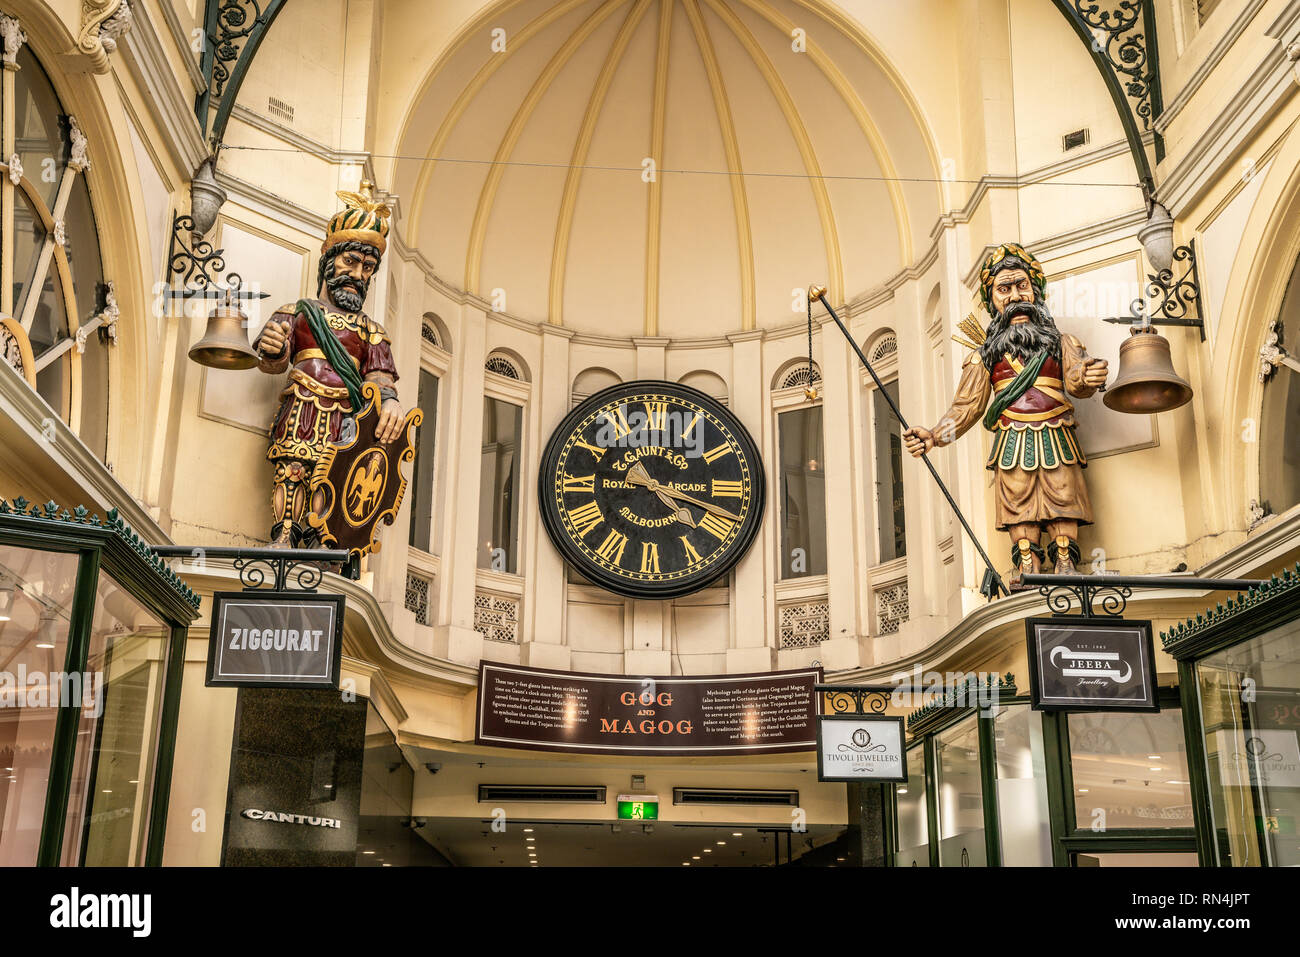 3rd January 2019, Melbourne Australia : Close-up view of Gog and Magog and Gaunt's clock at the Royal Arcade in Melbourne Victoria Australia Stock Photo